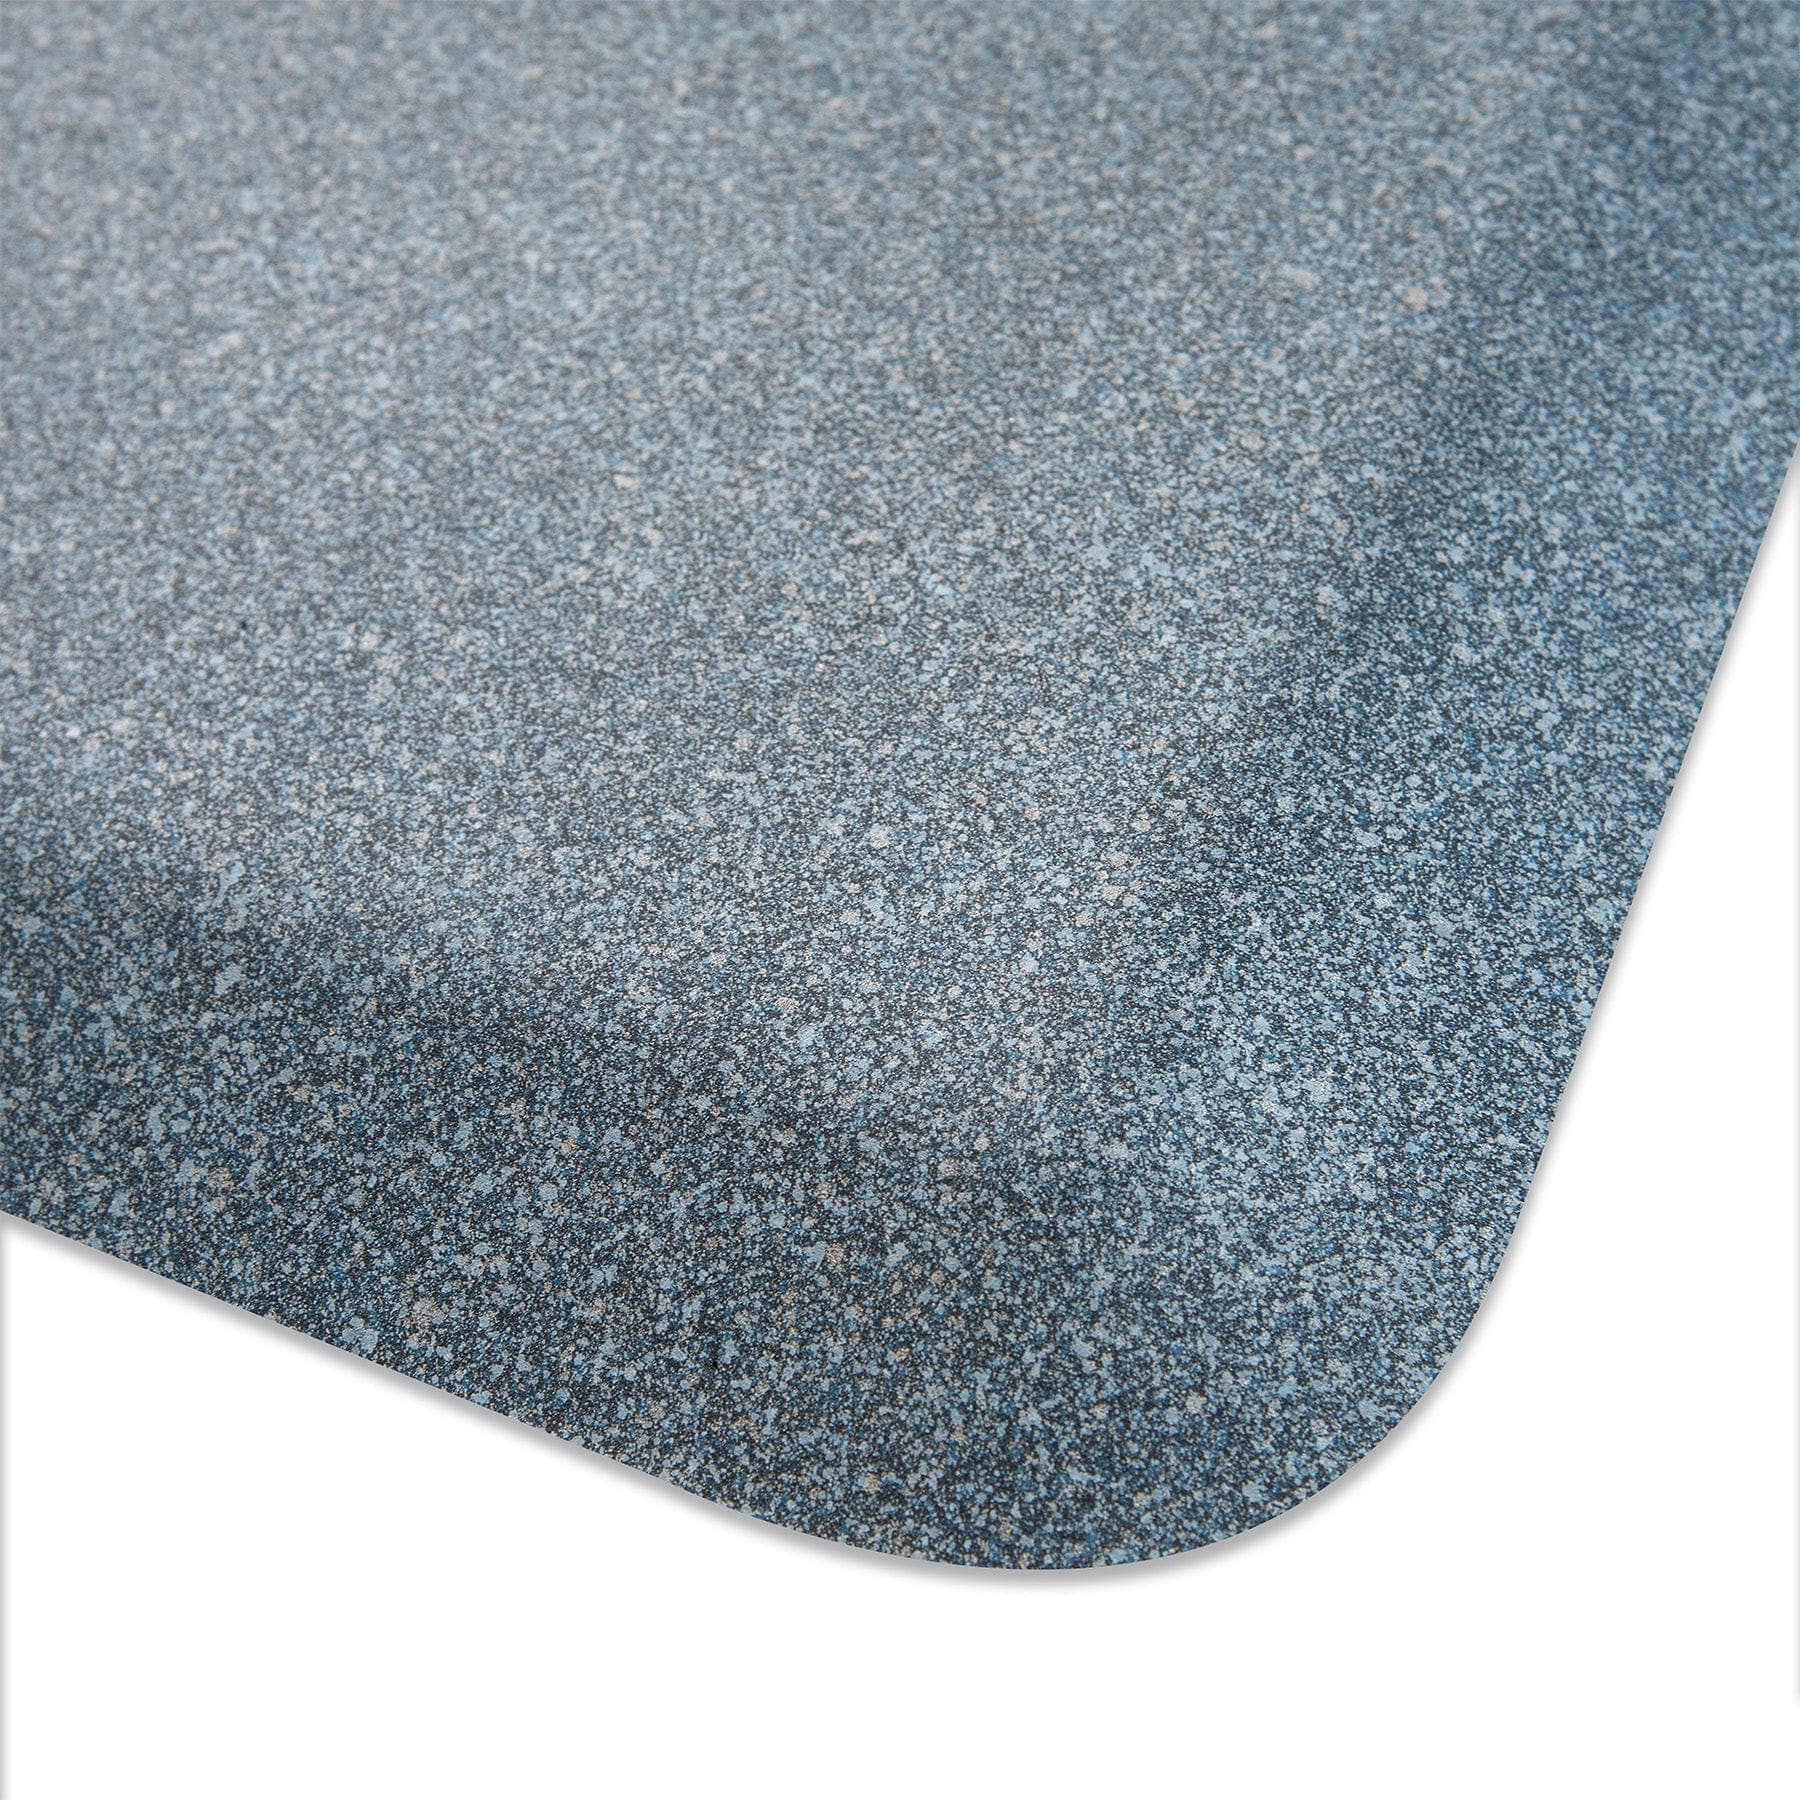 WellnessMats All WellnessMats WellnessMats Granite Collection - Sky